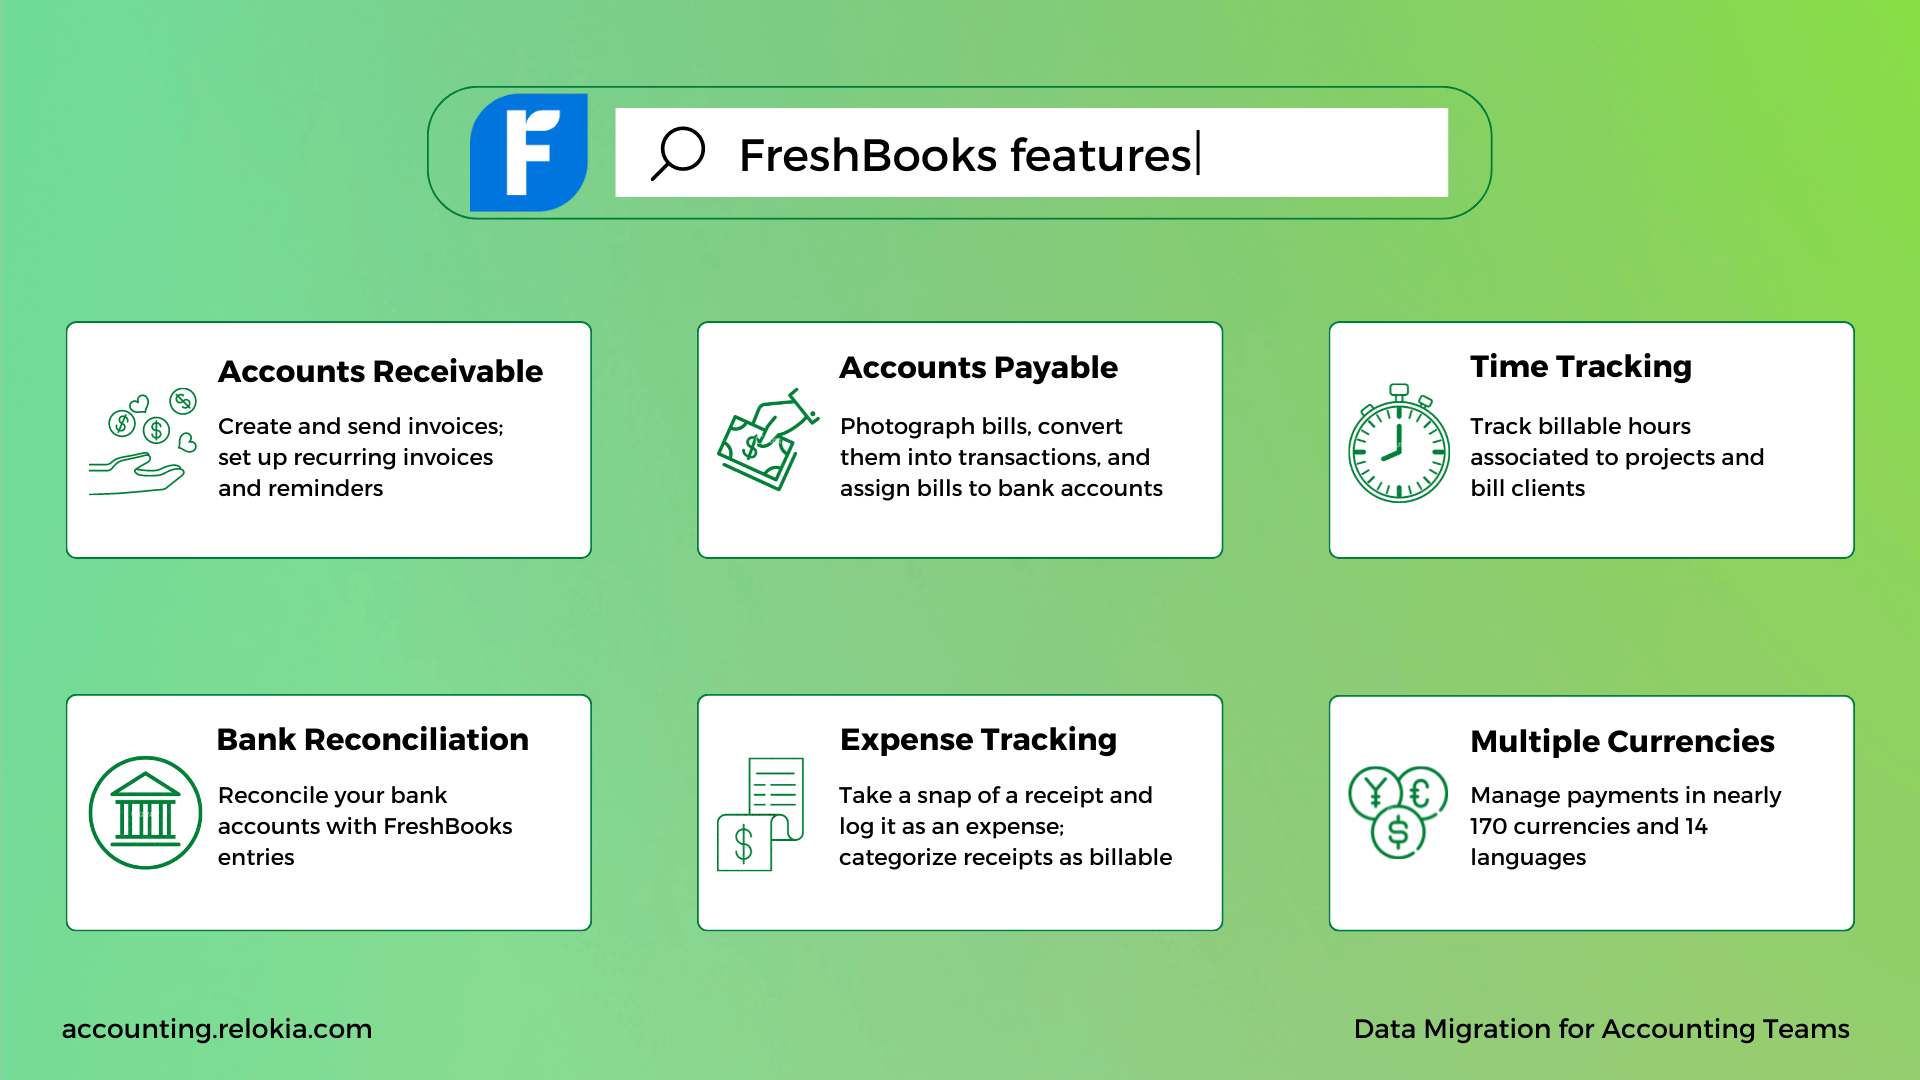 FreshBooks Features